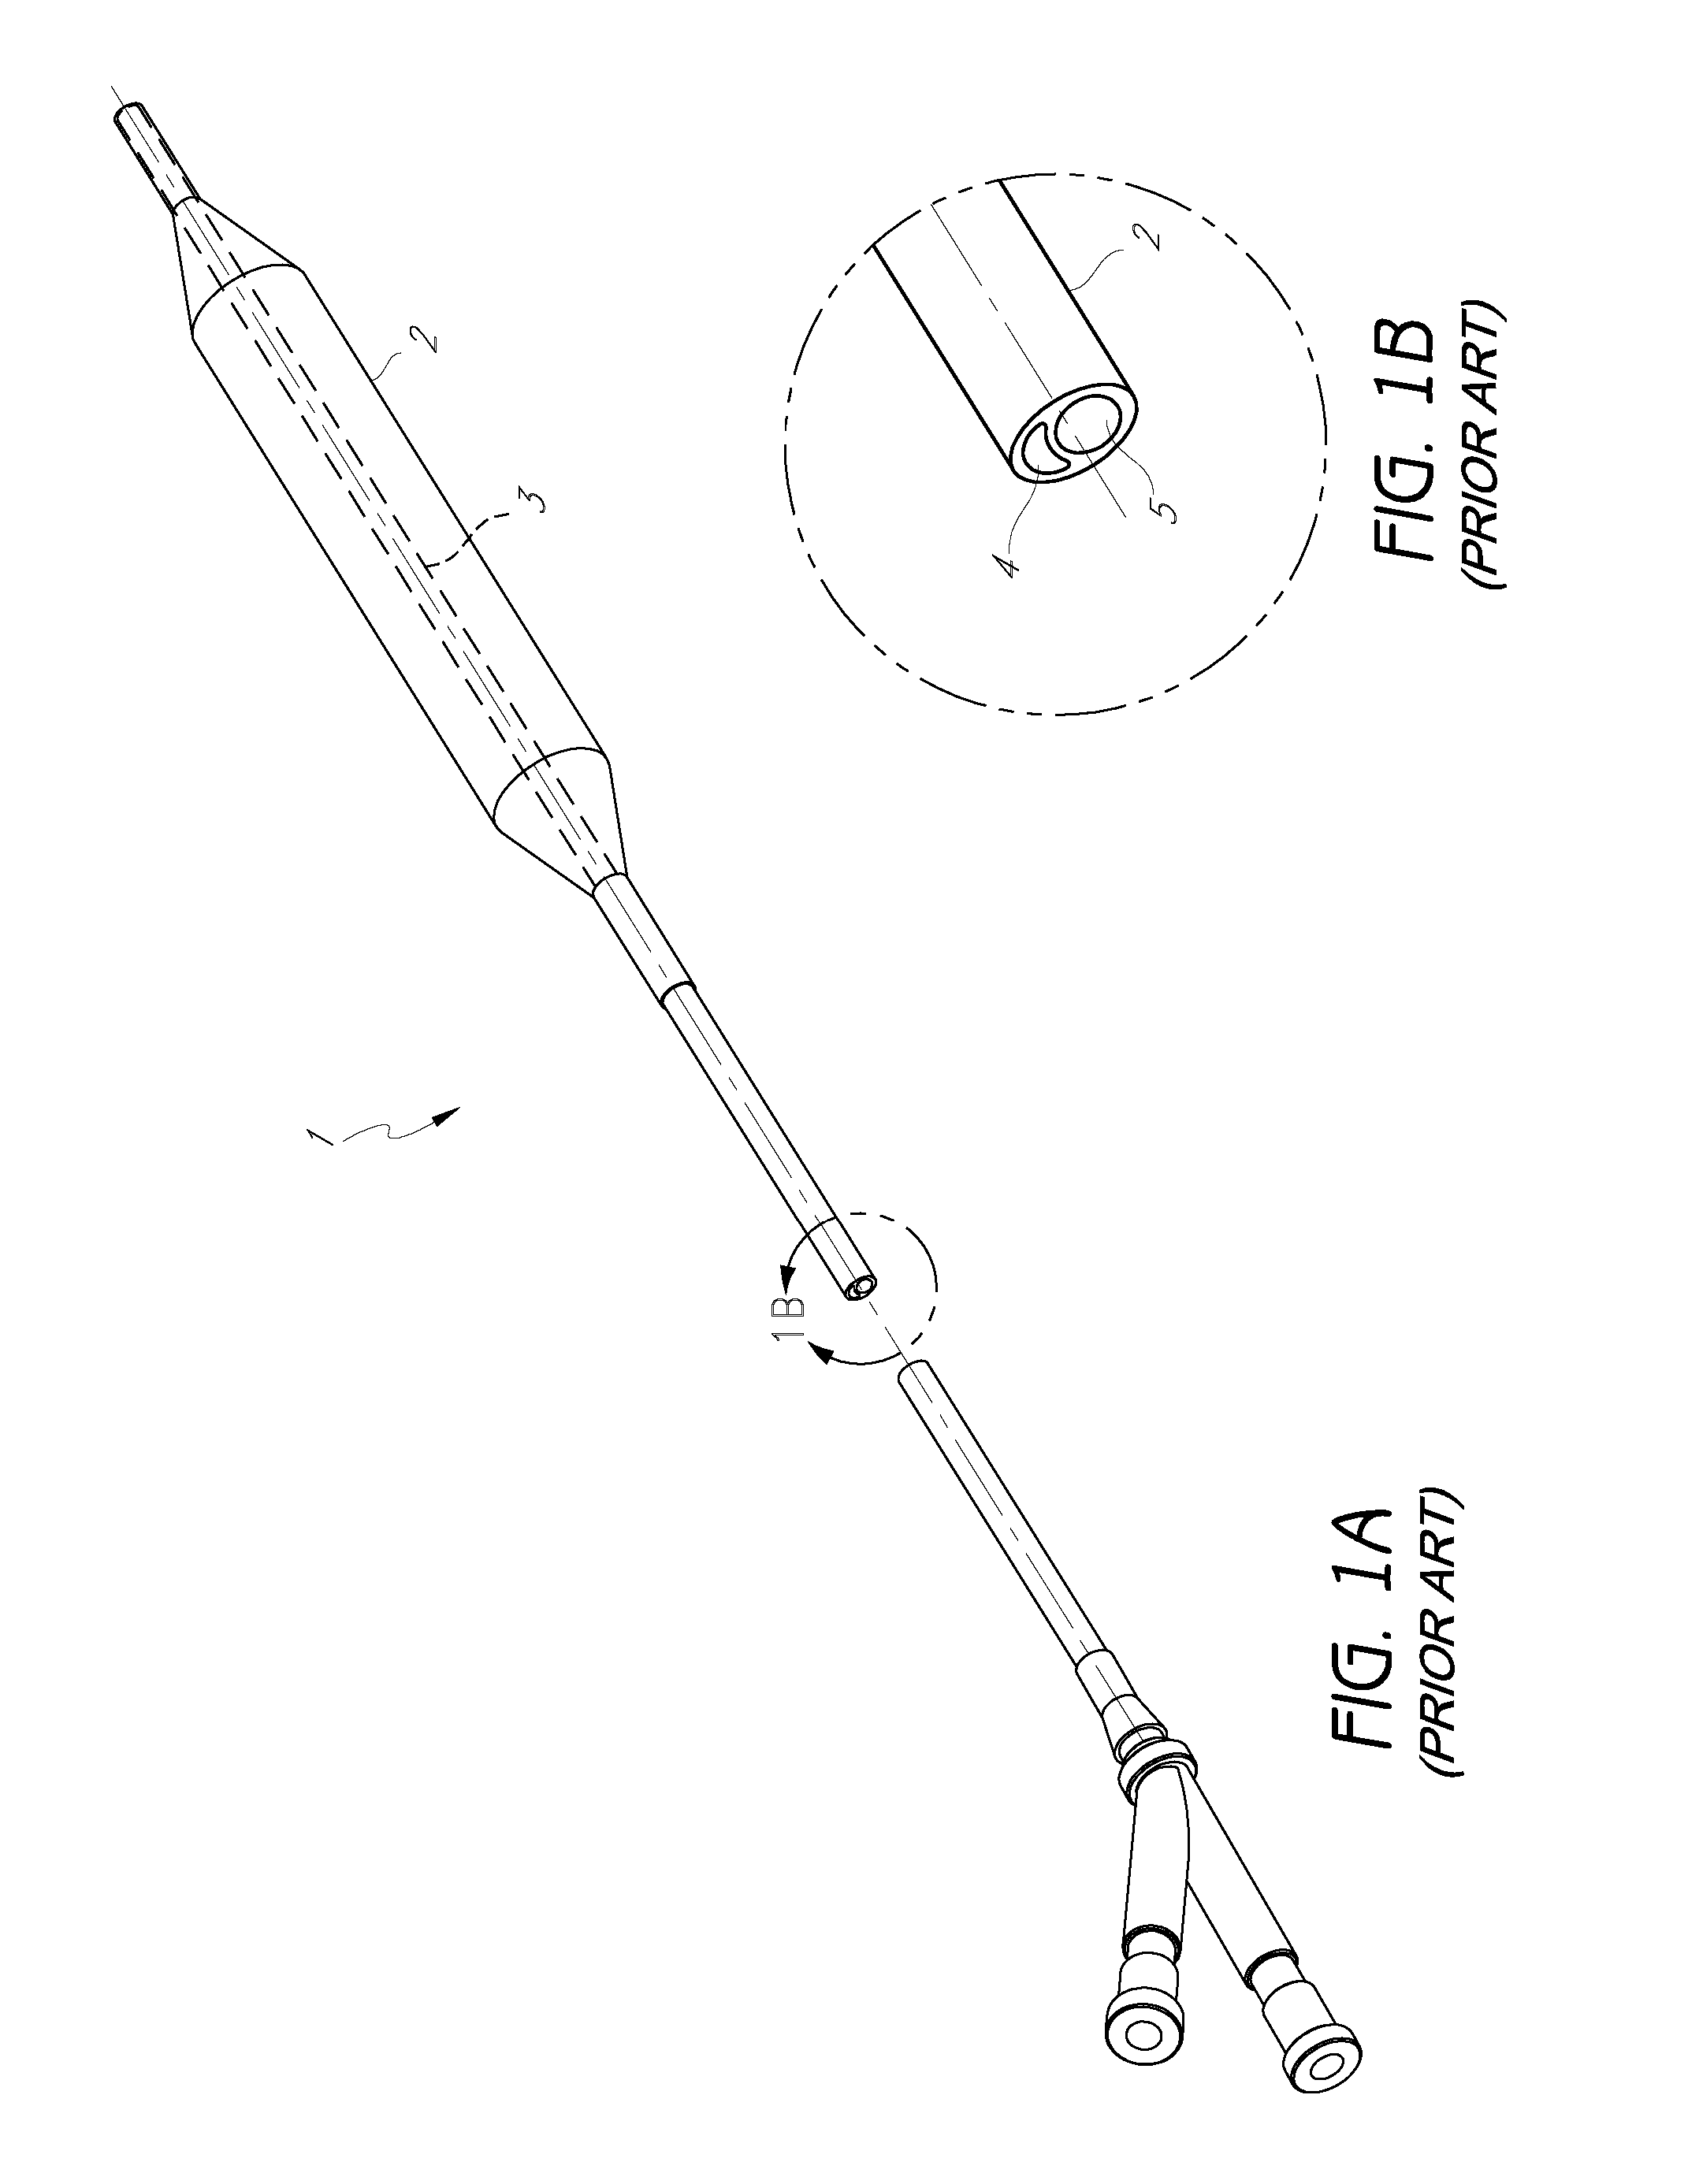 Multi-layer balloons for medical applications and methods for manufacturing the same